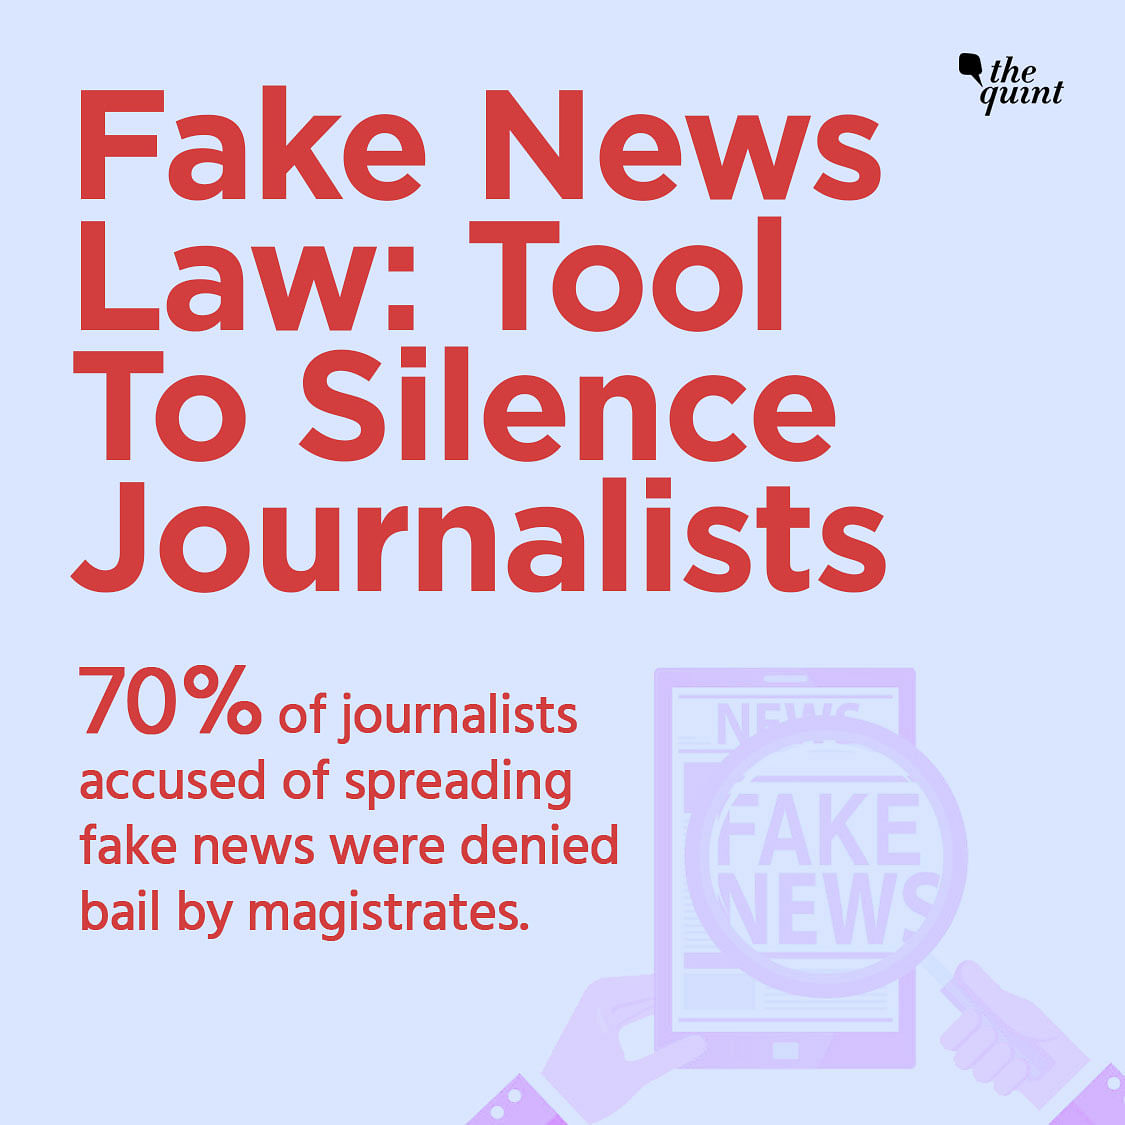 In UP, 'fake news' has become a form of political punishment to gag journalists who speak truth to power.